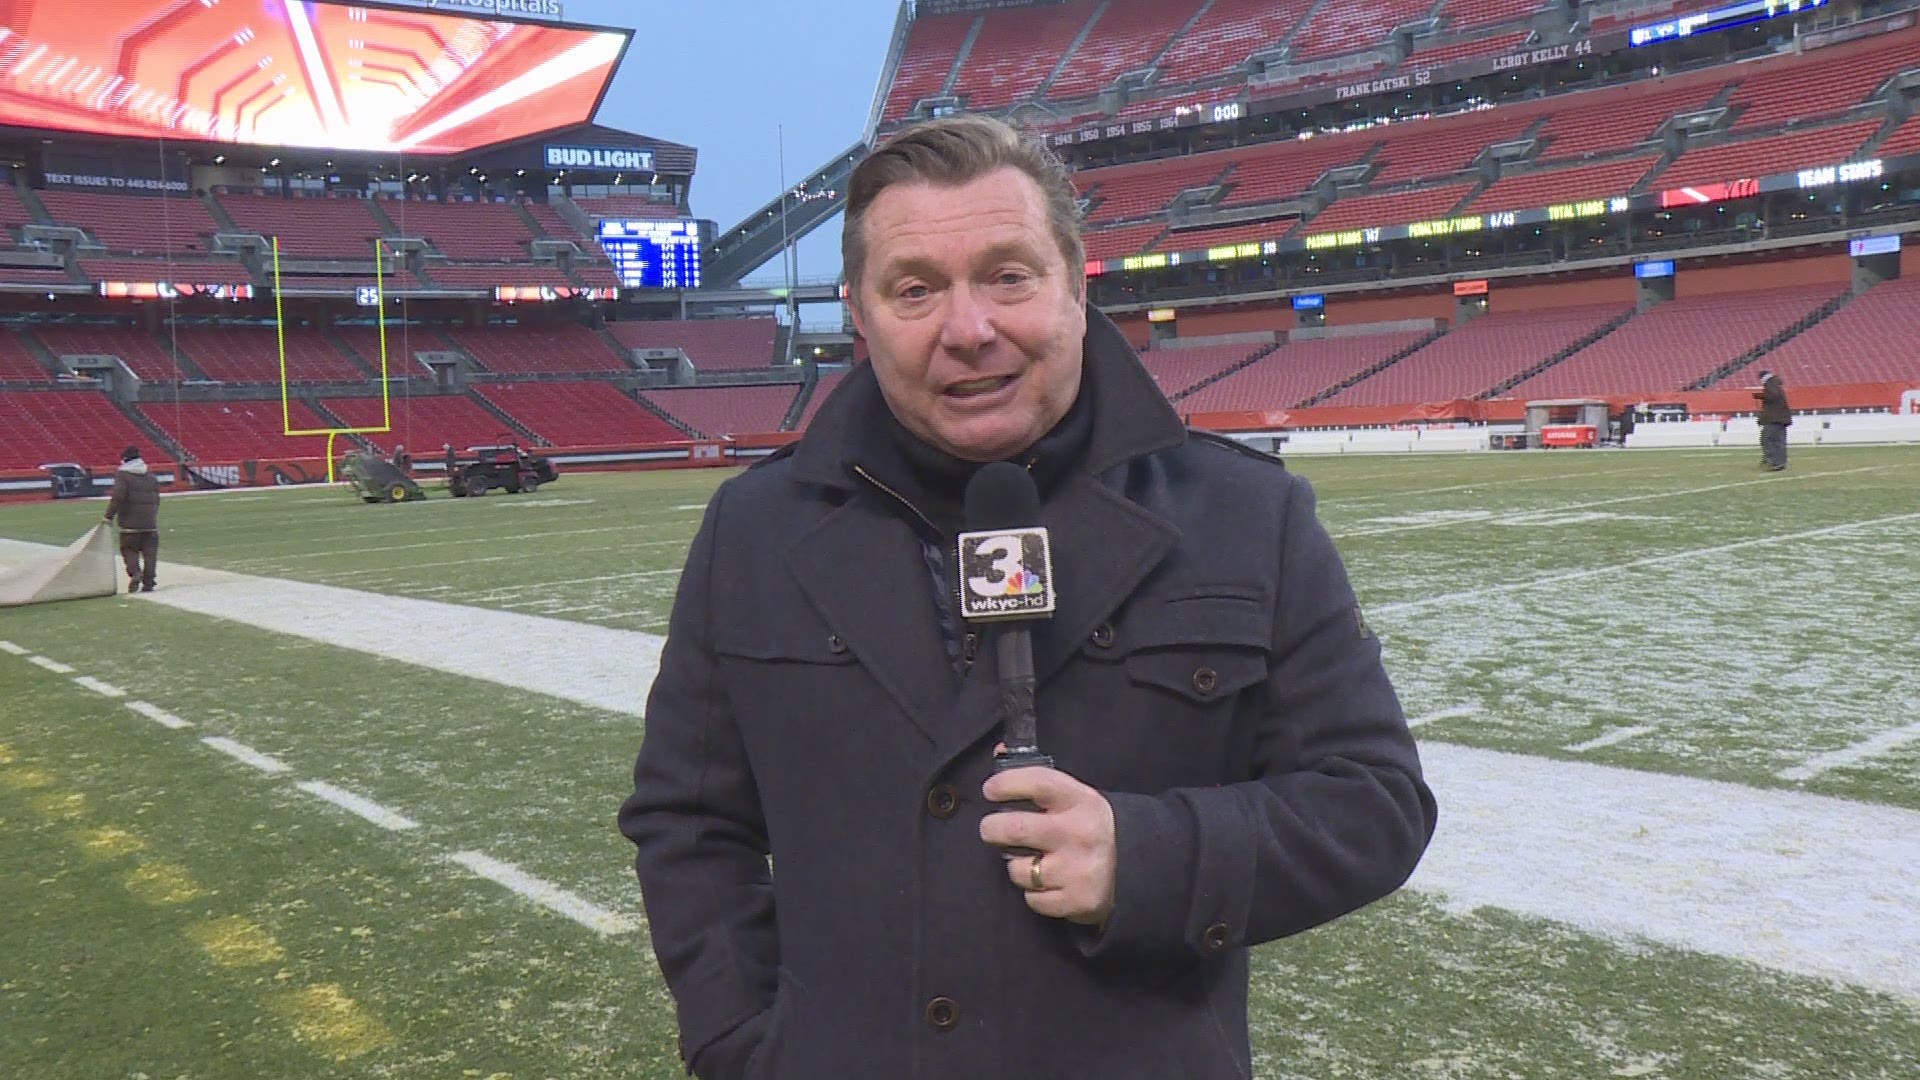 Here is Jimmy's Take for the Browns vs. Bengals game on Sunday, December 11.